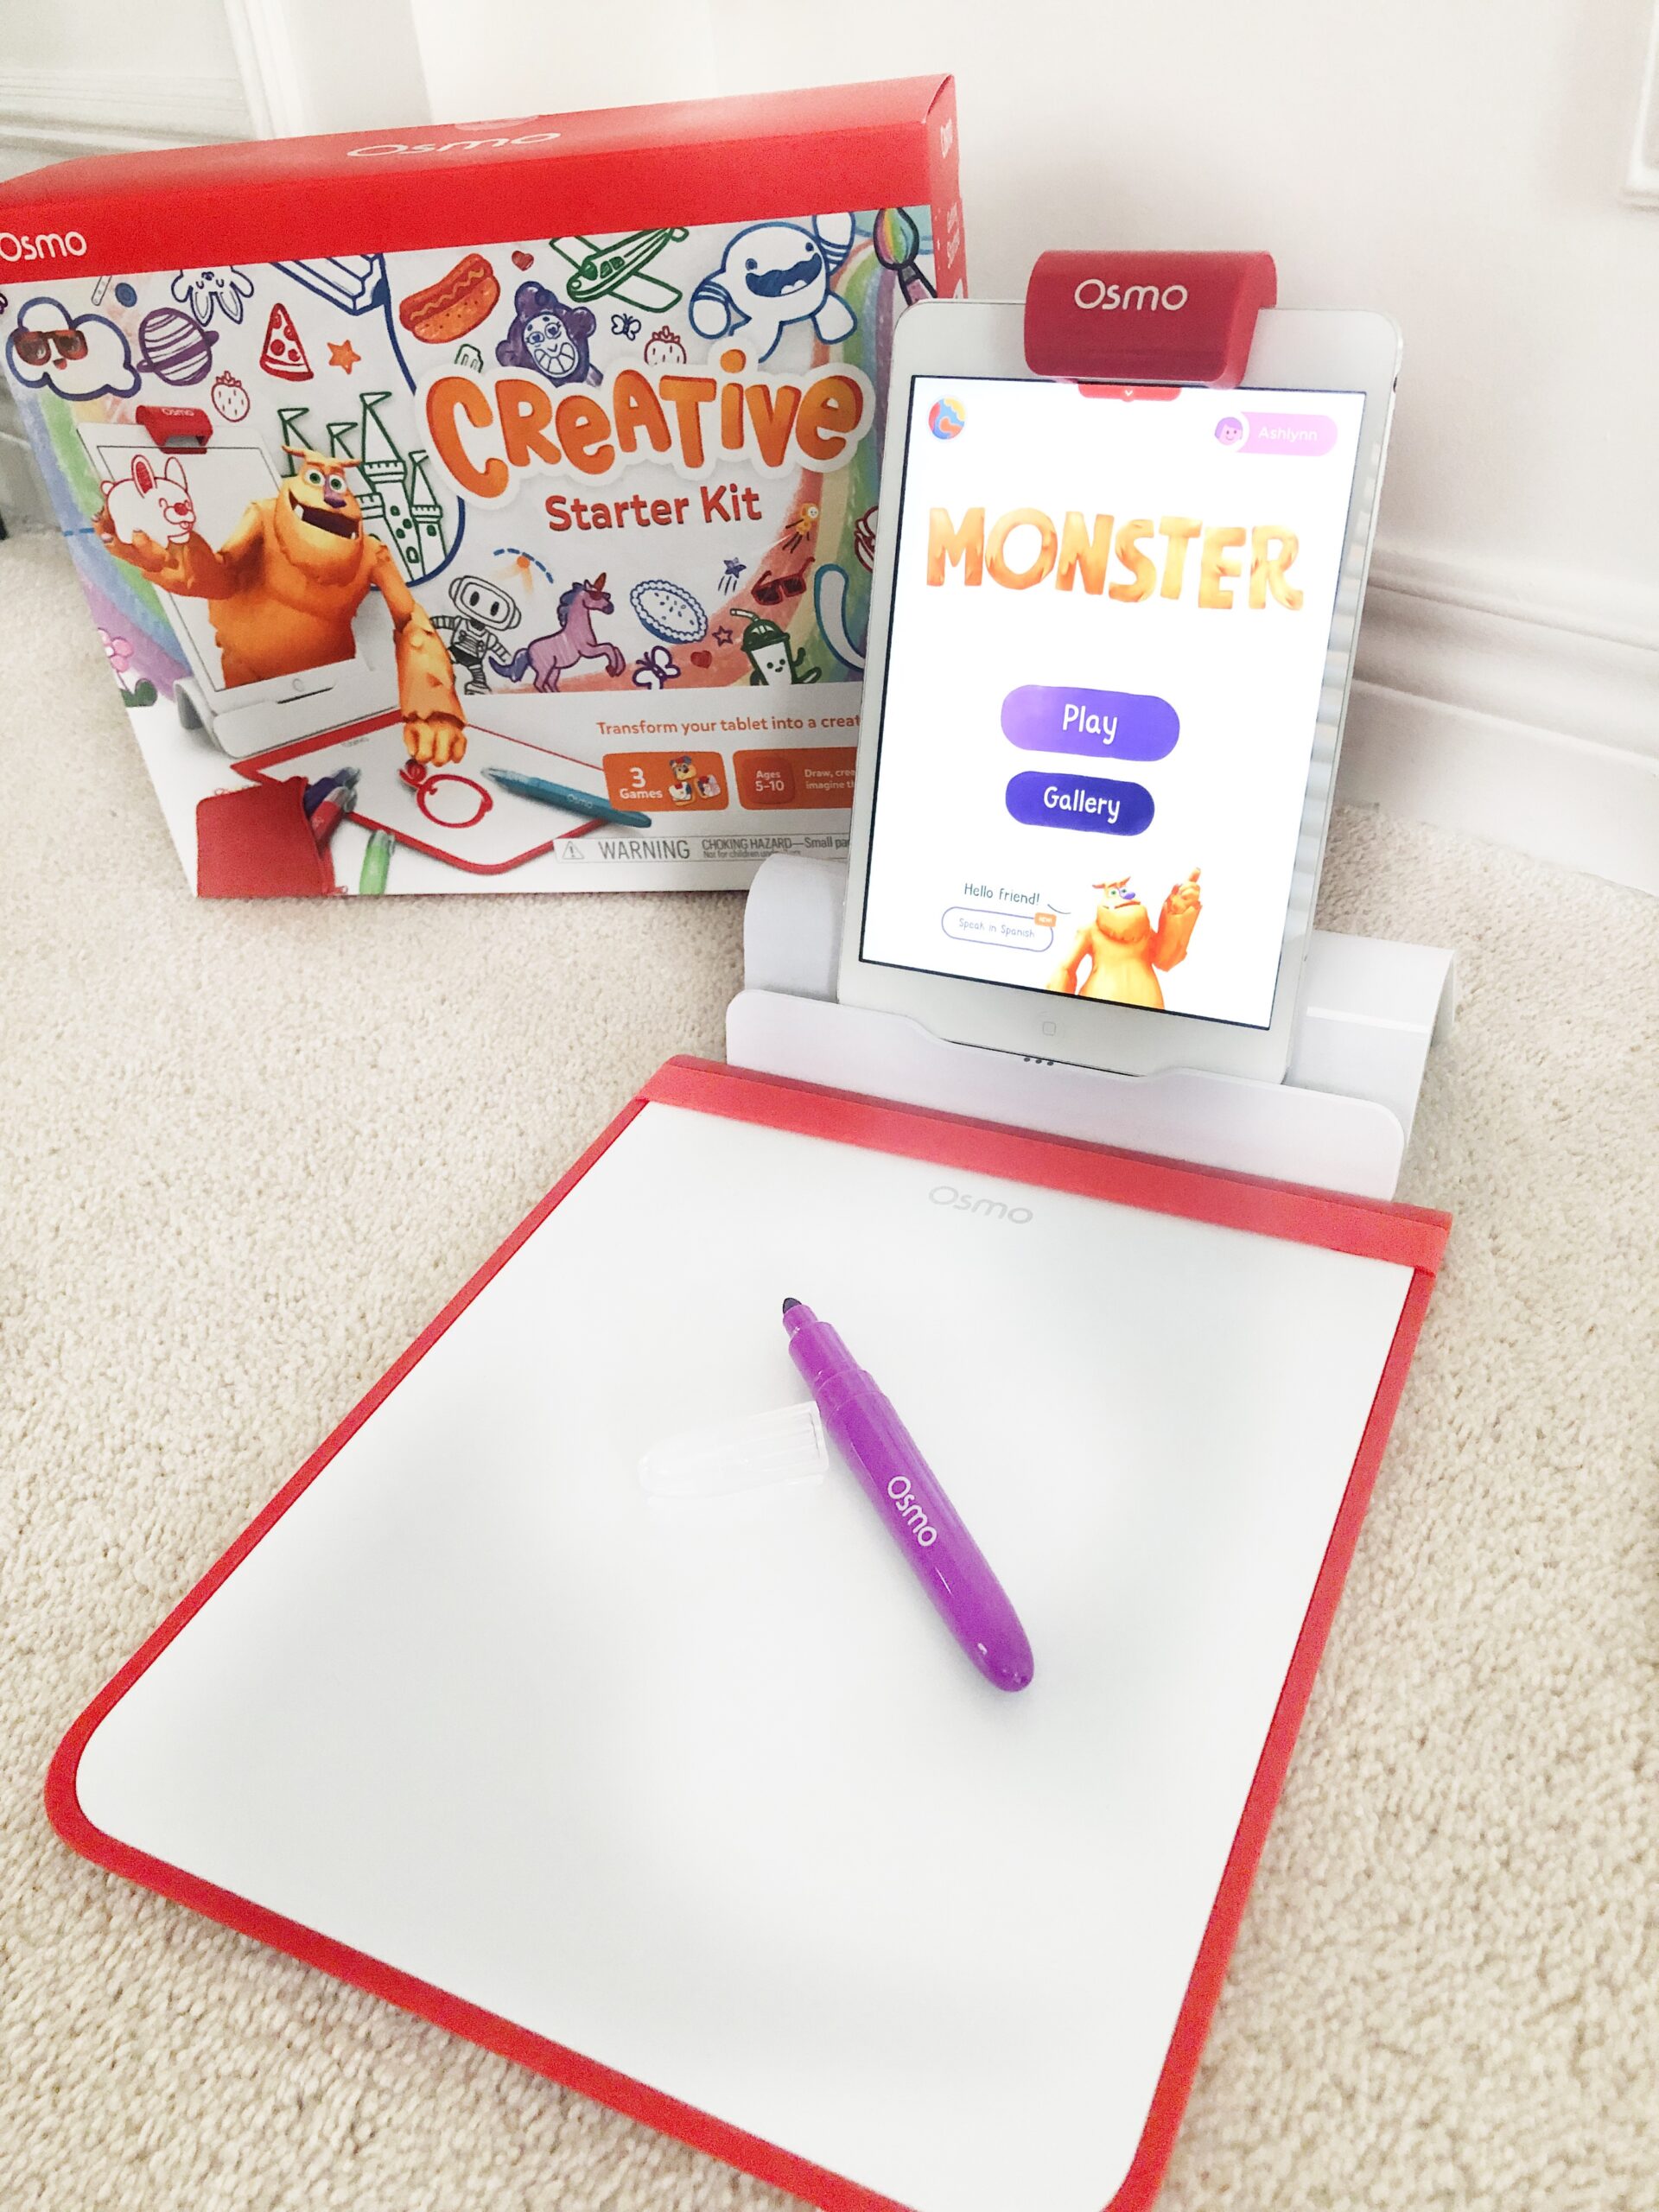 Osmo Creative Starter Kit (Monster) Review On Livin' Life with Style 